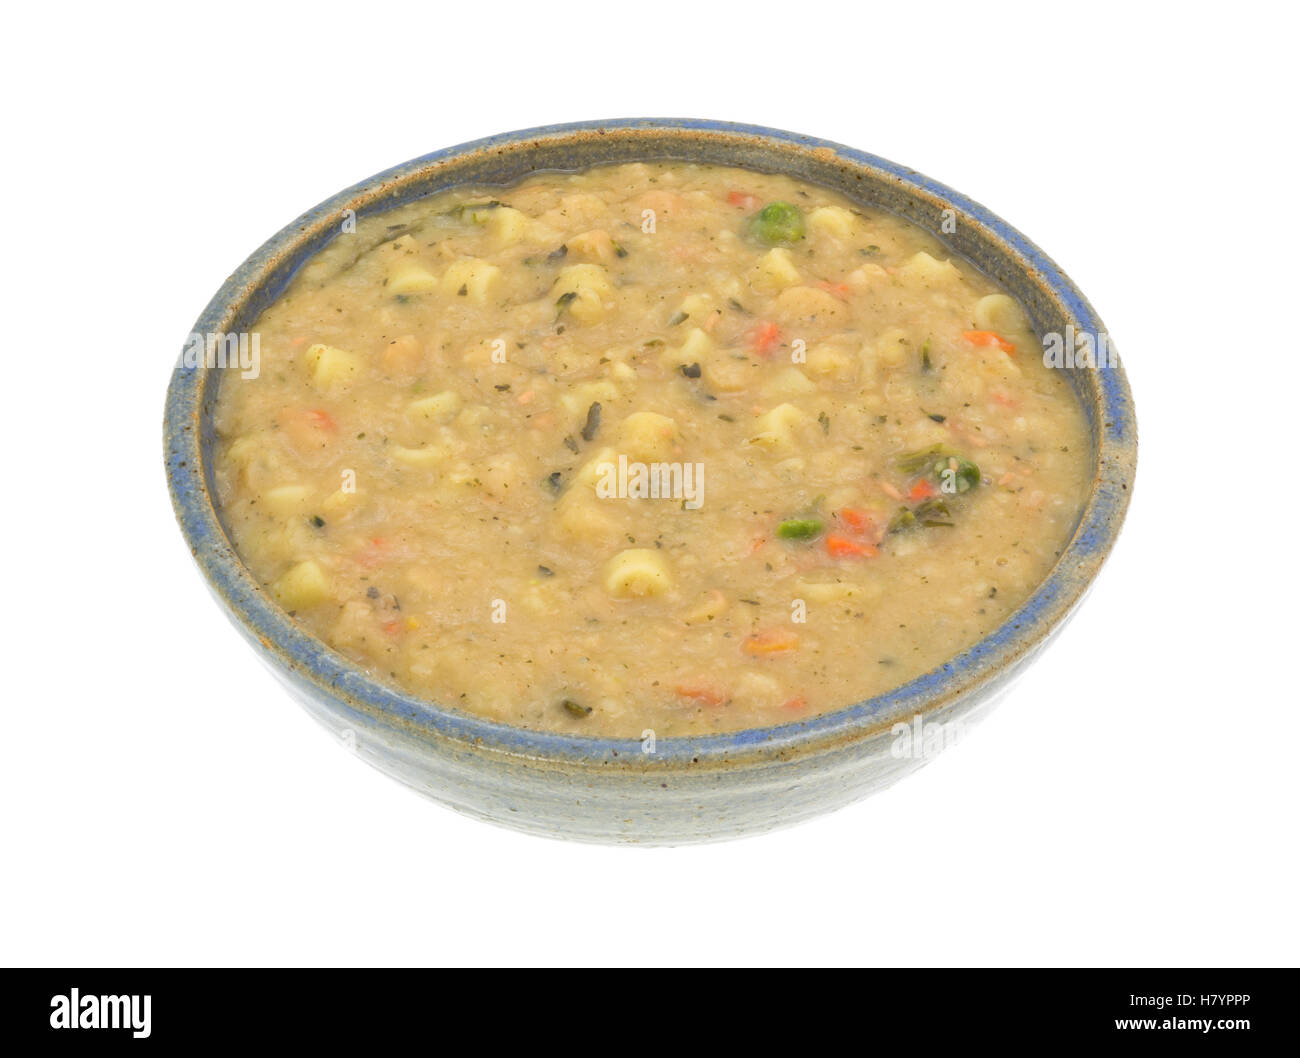 A serving of white bean soup in an old stoneware bowl isolated on a white background. Stock Photo